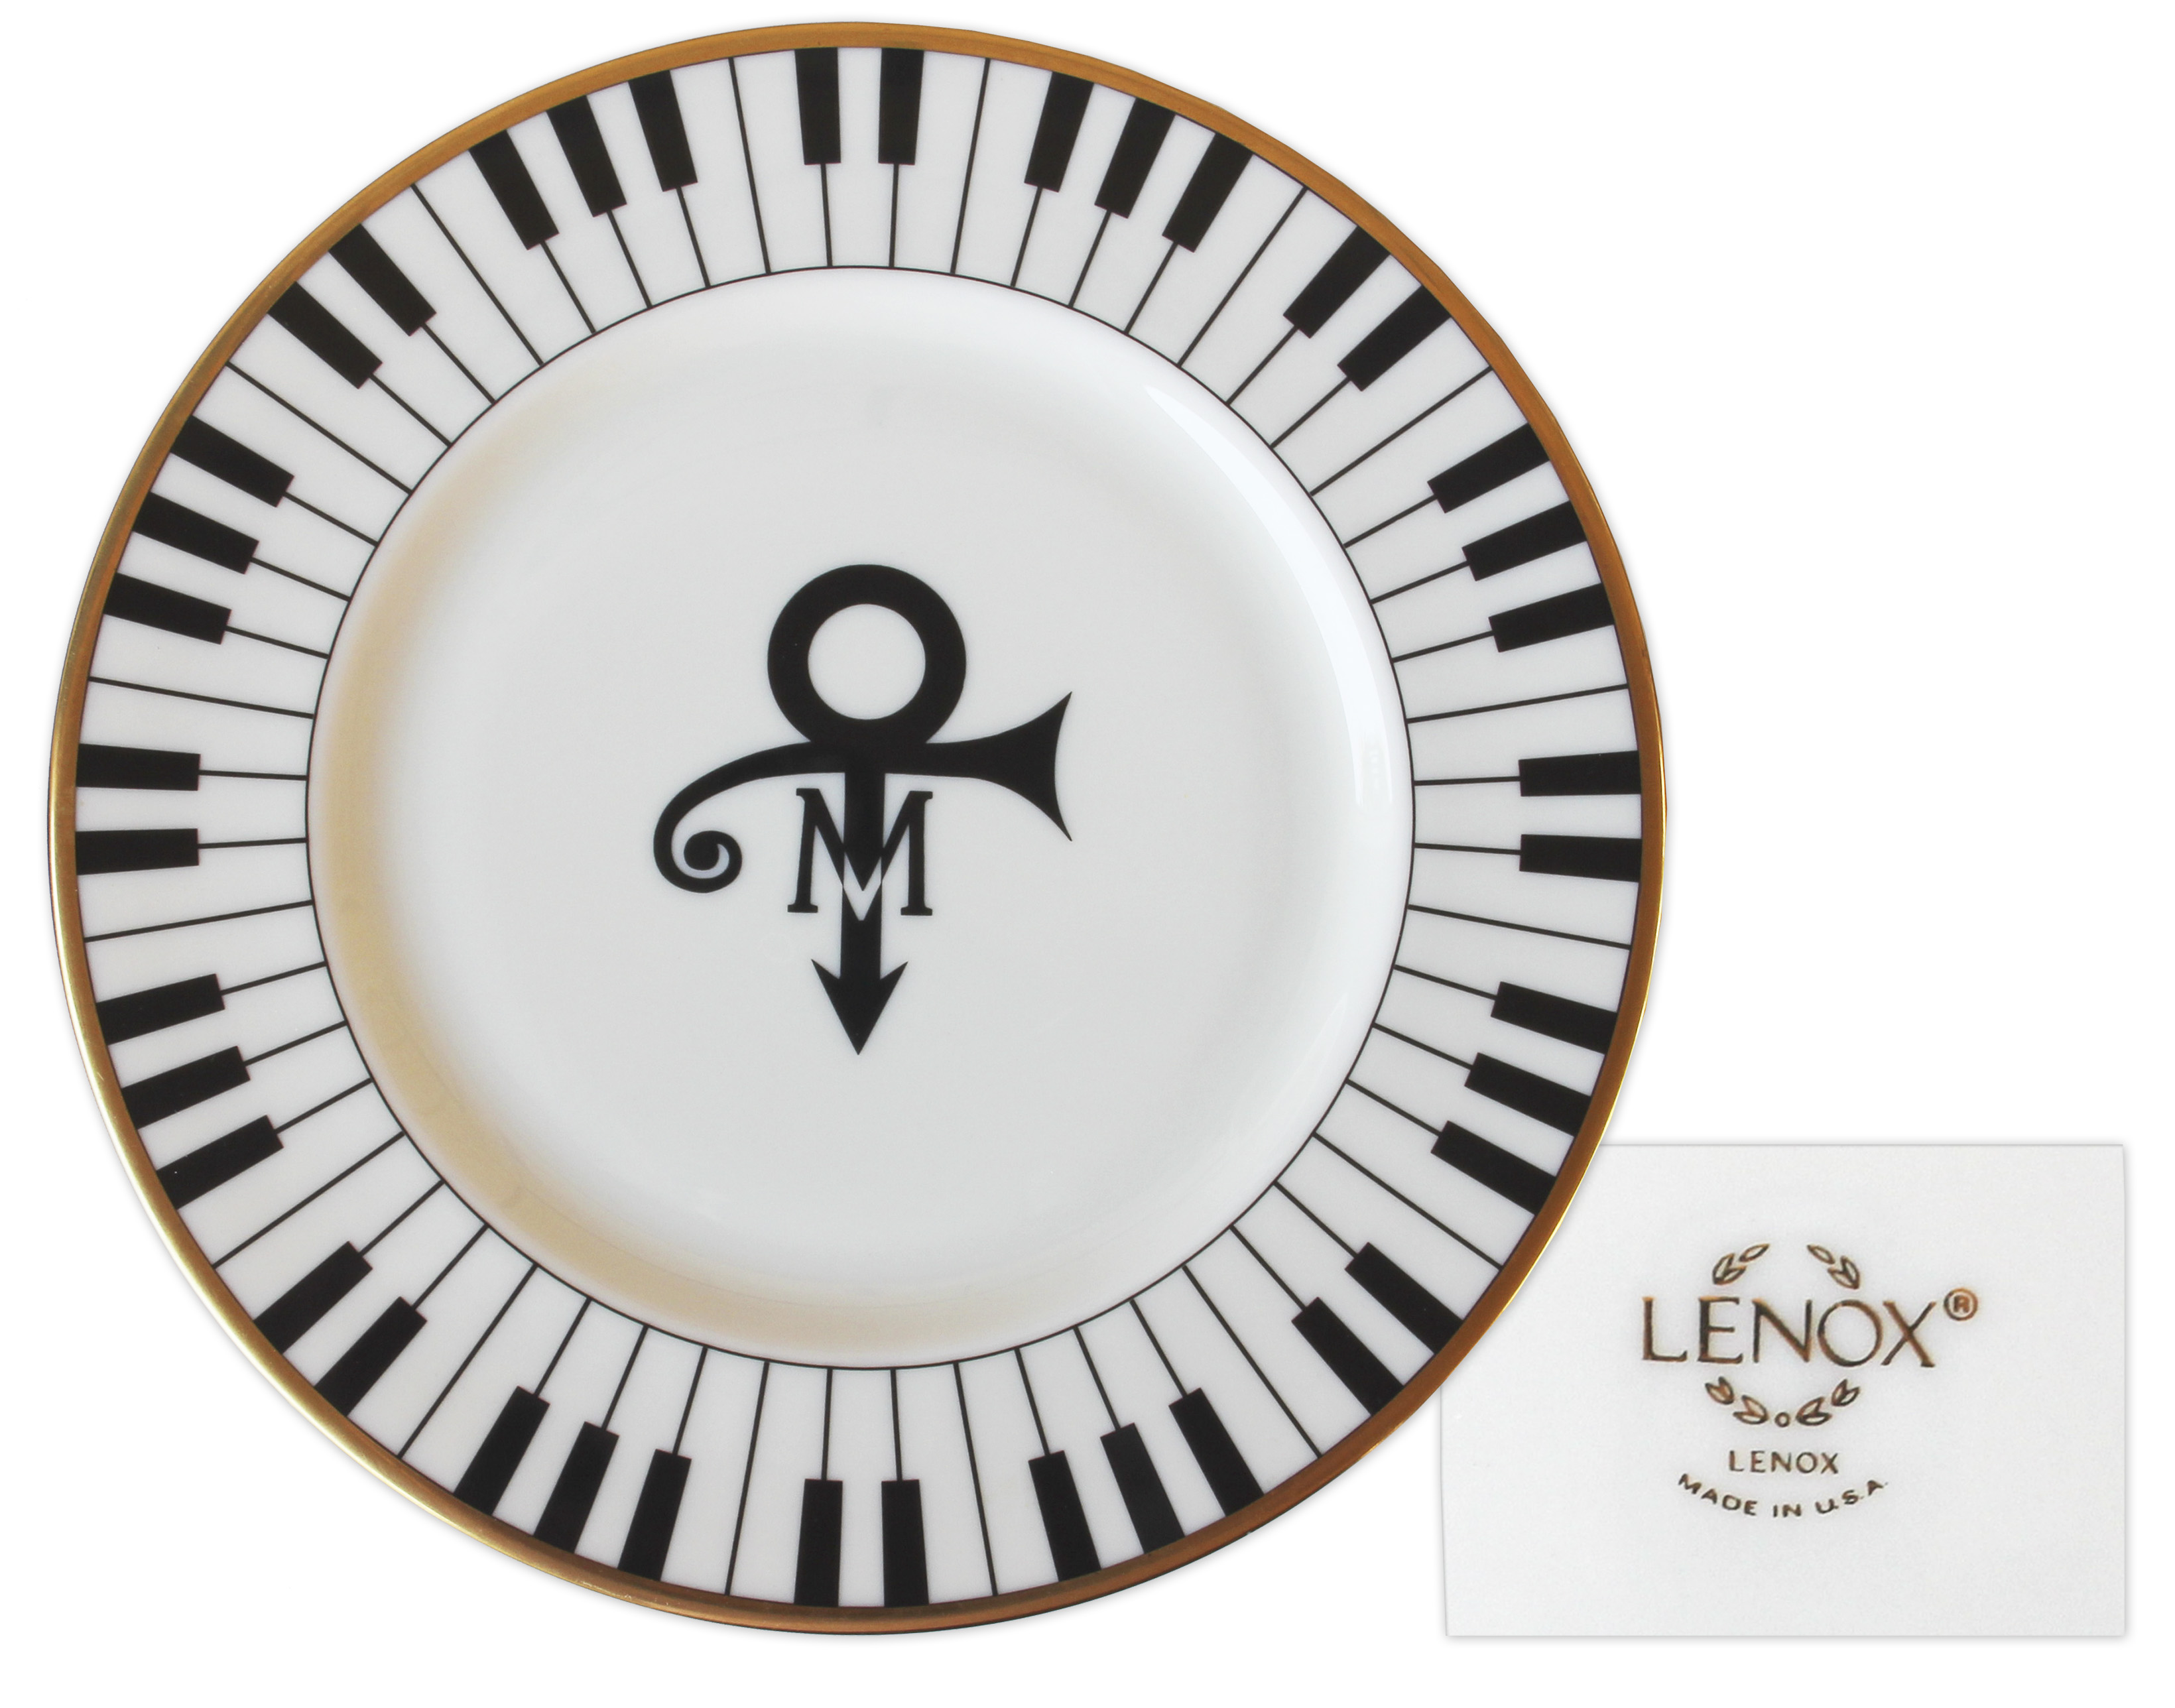 Prince Memorabilia Auction China From Prince's Wedding -- Featuring Prince's Love Symbol